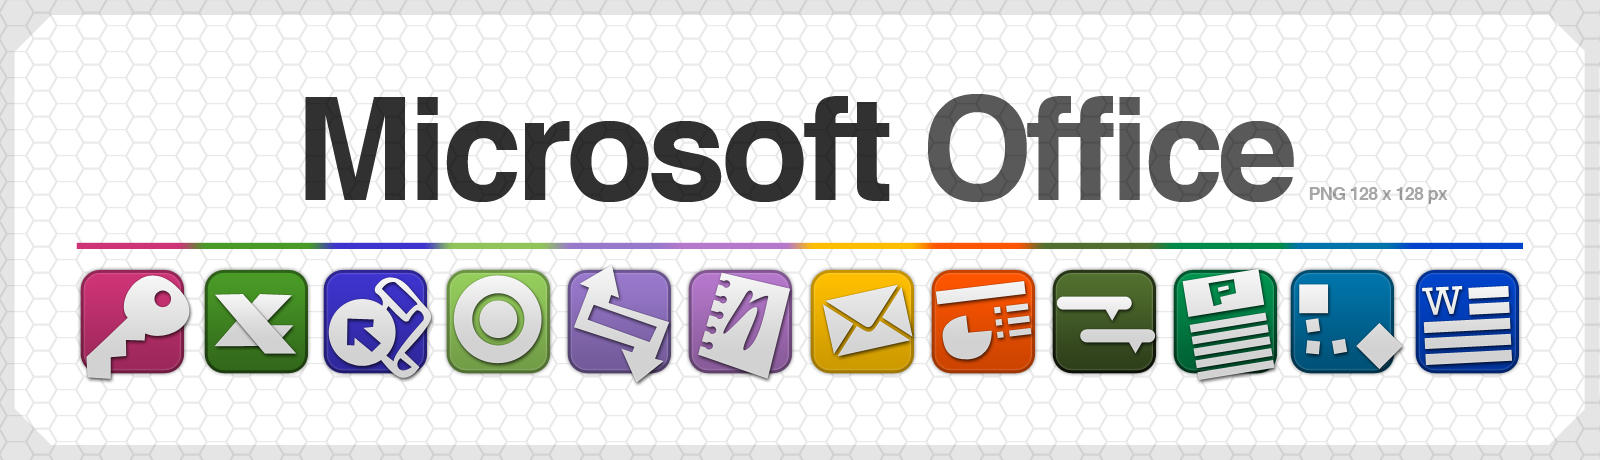 clipart for mac microsoft office - photo #28